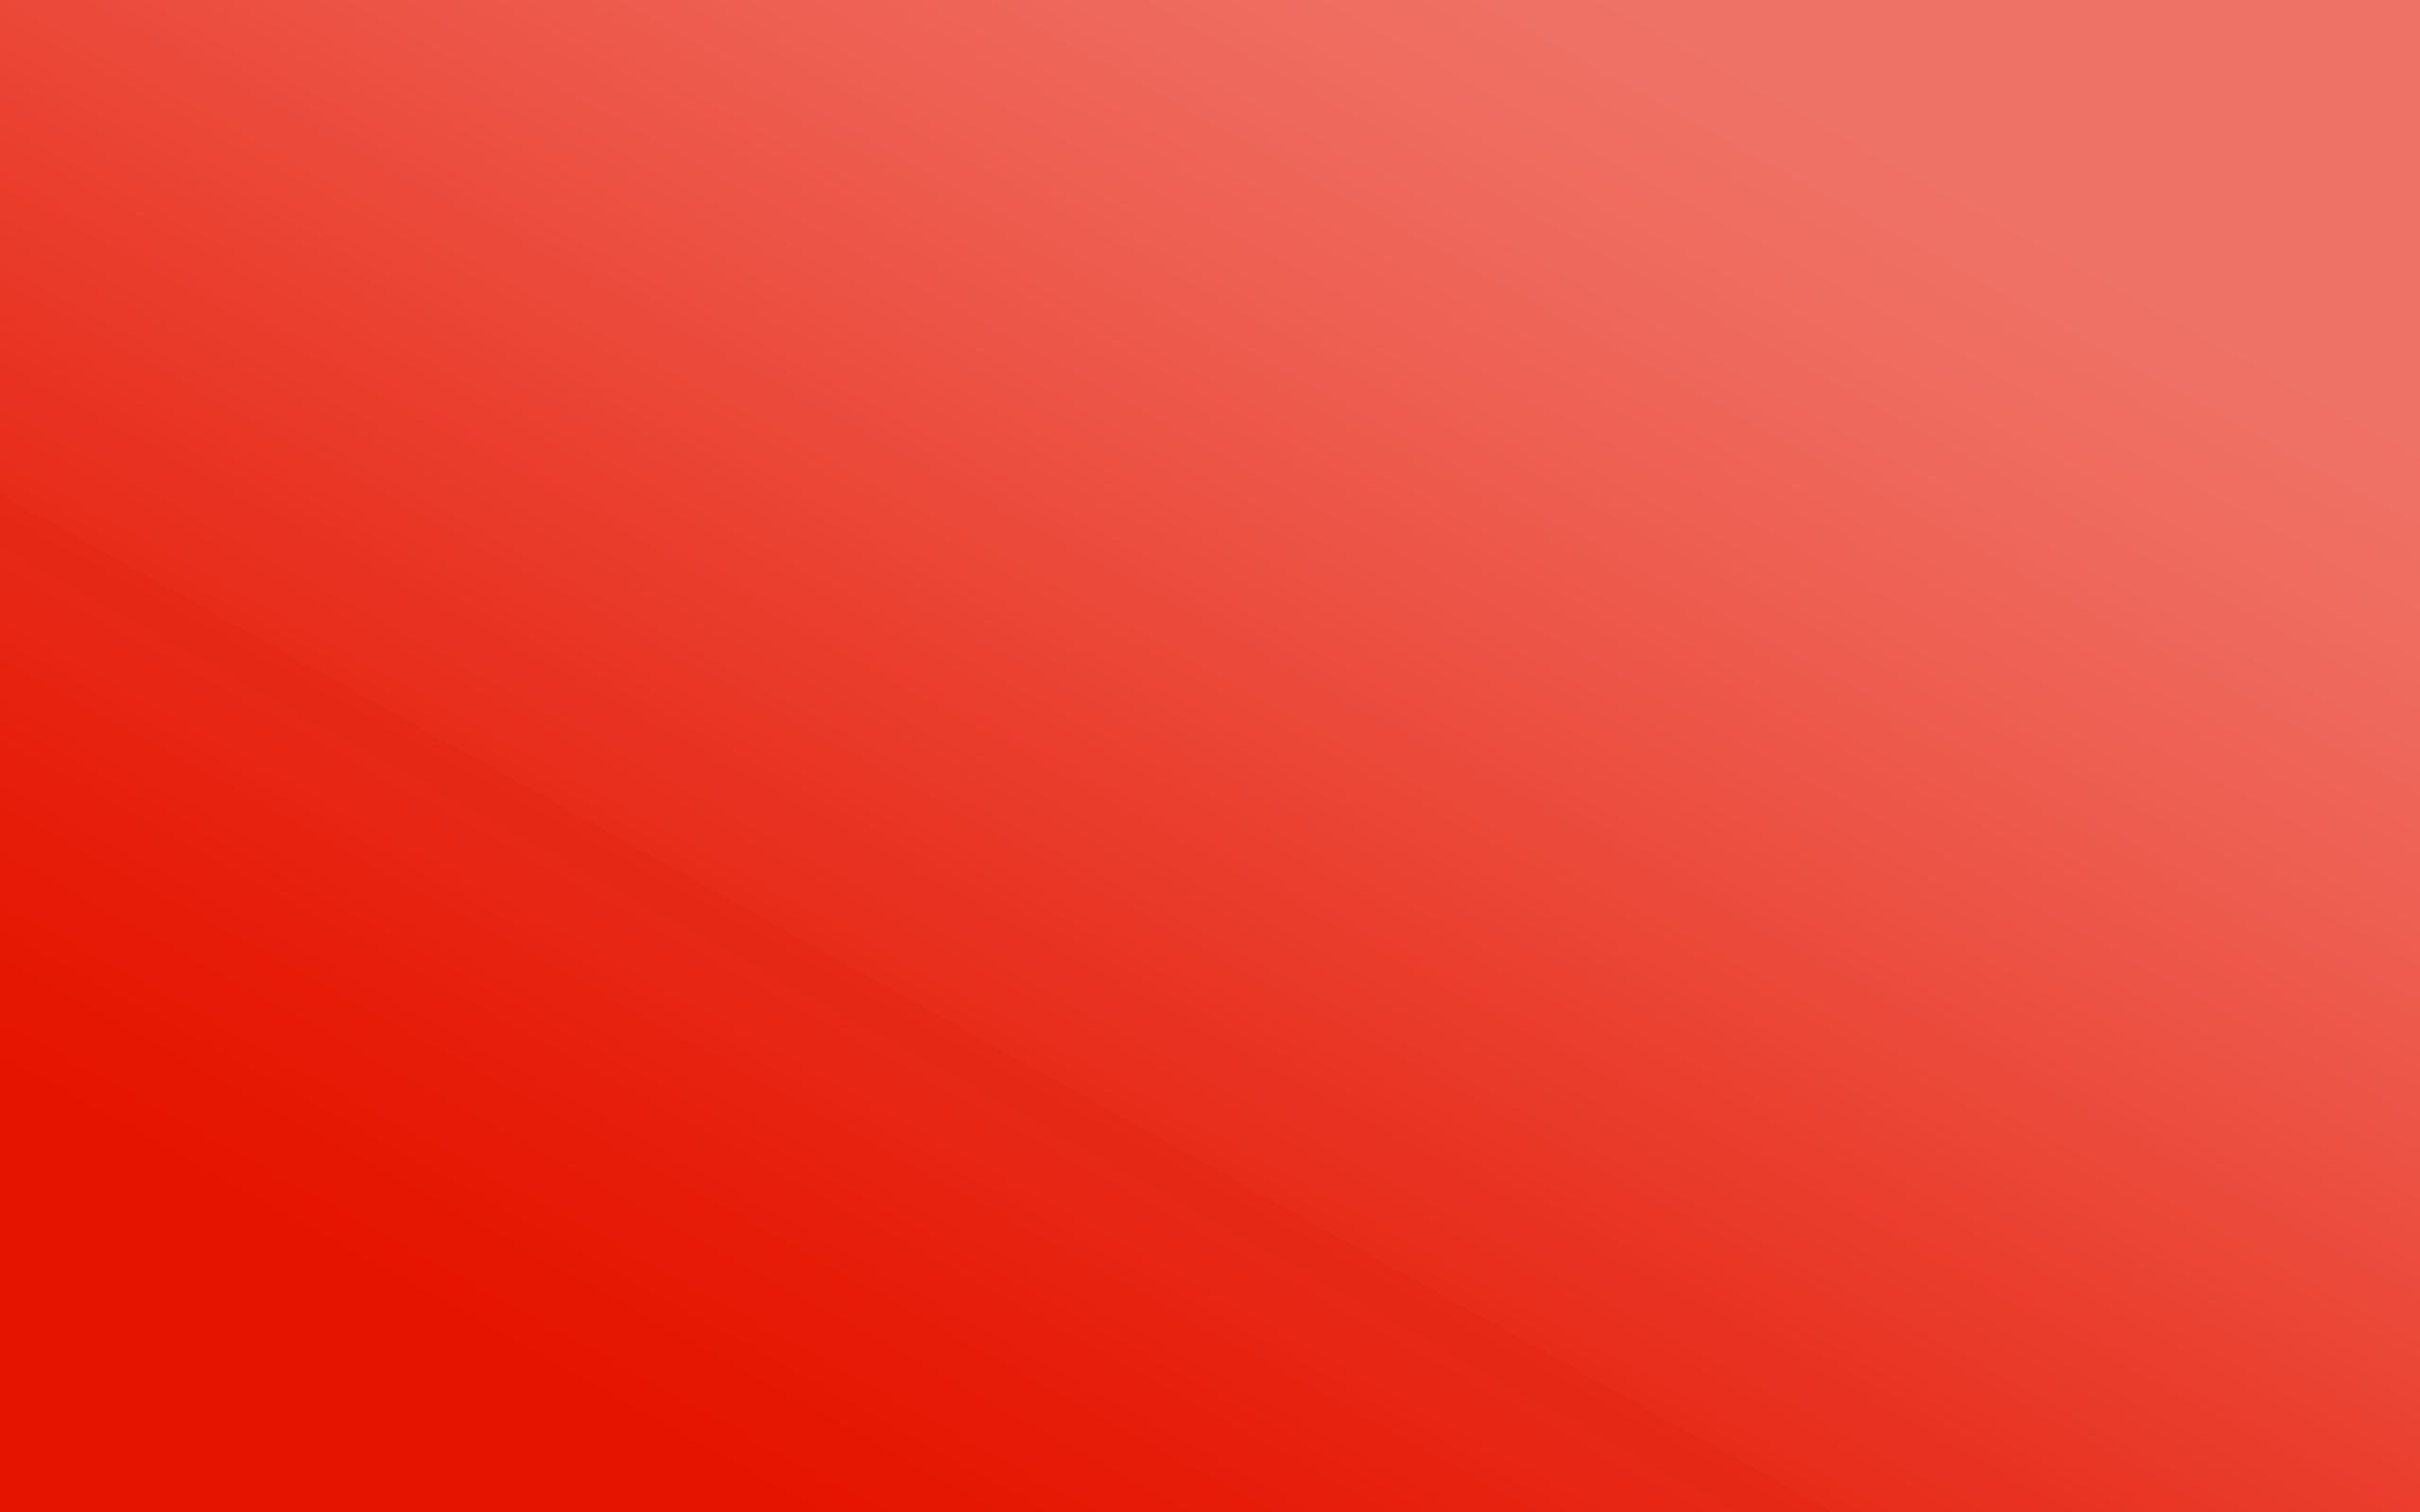 Download wallpaper 2560x1600 red, solid, light, bright, scarlet HD background